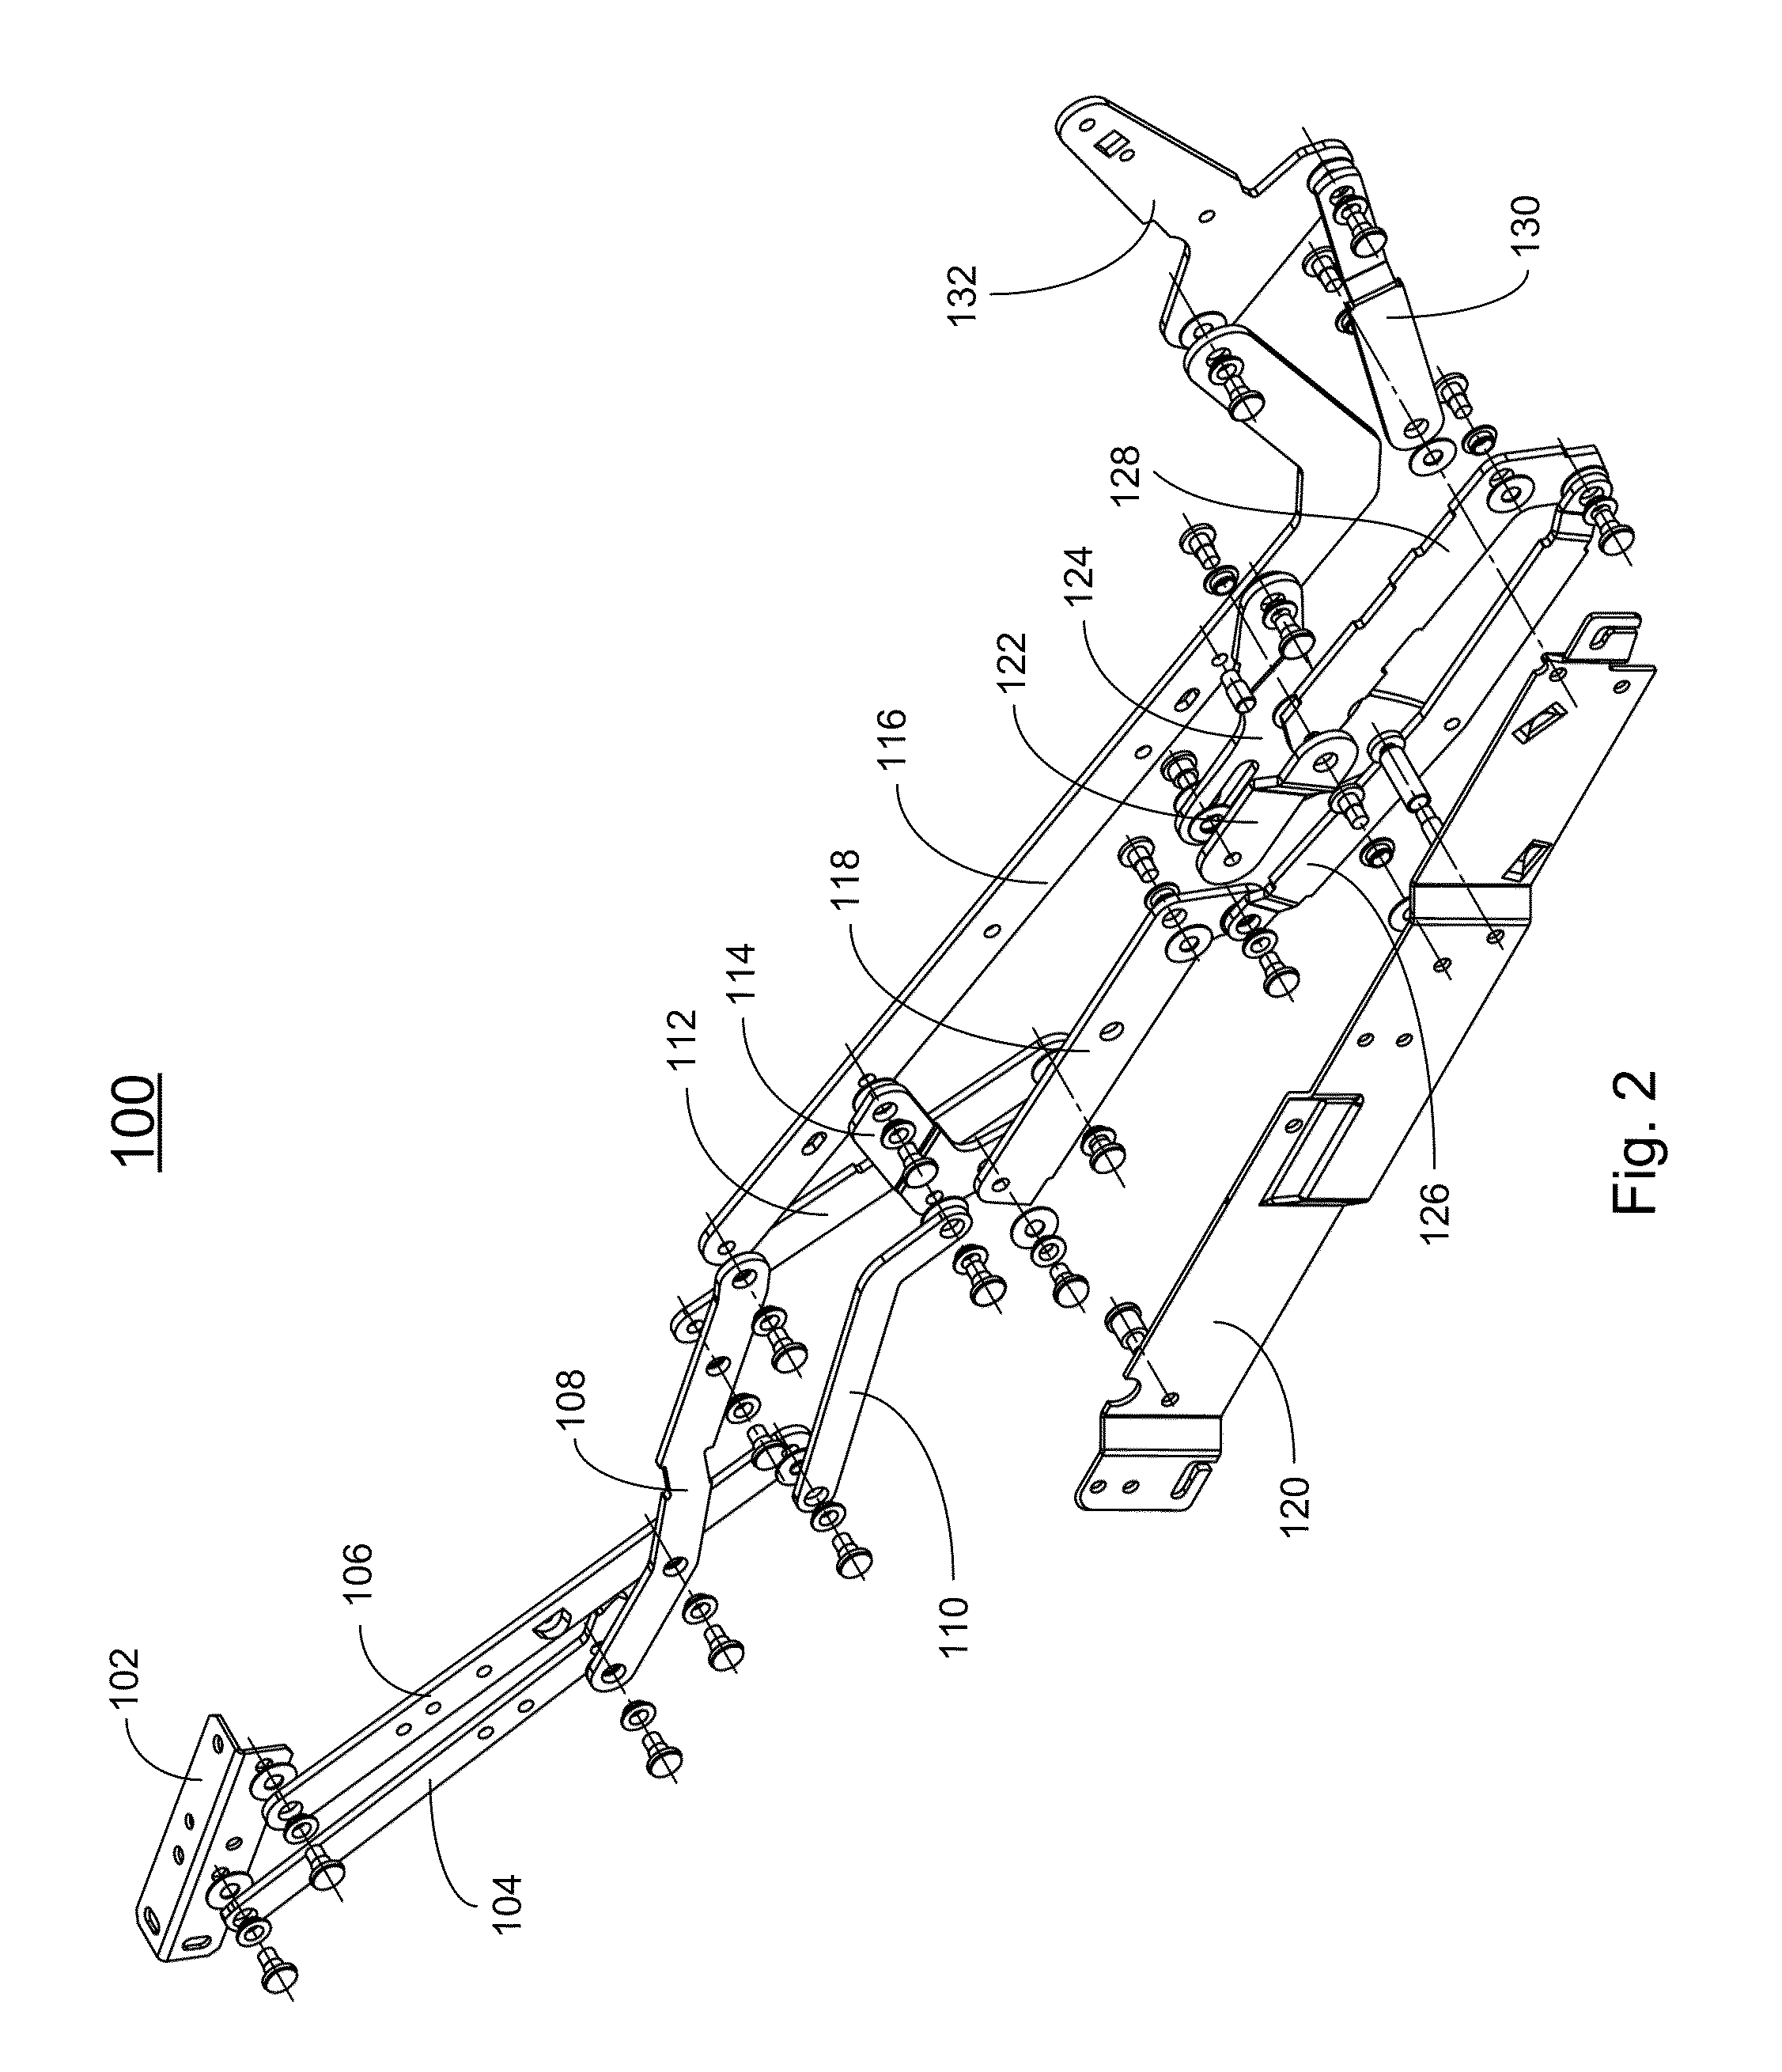 Lift chair and a chair frame with a position holding mechanism for use therewith